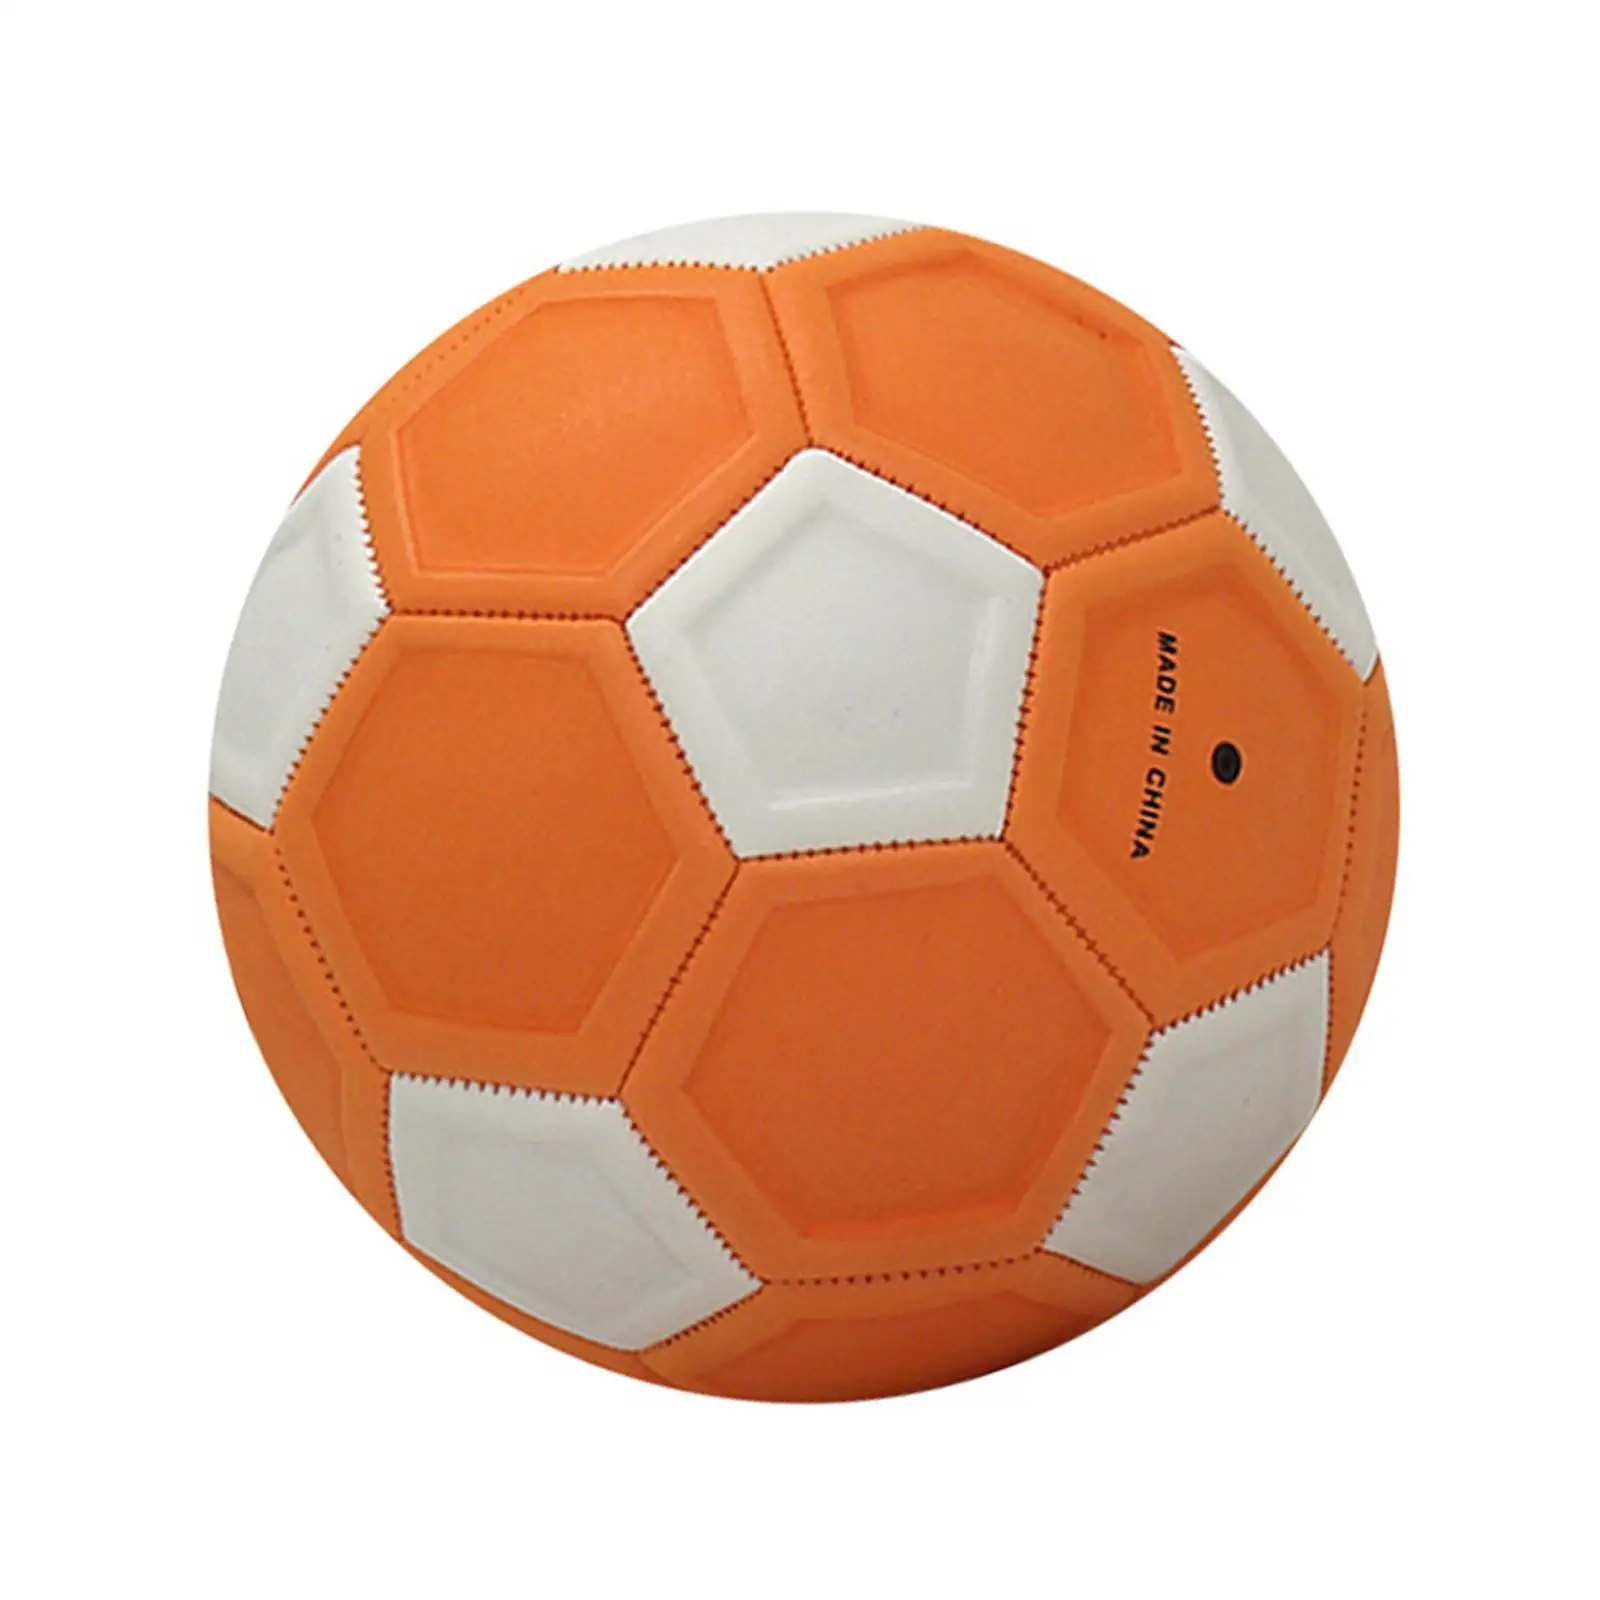 Soccer Bll Size 4 Officil Mtch Bll Sports Bll Futsl Gmes for Youth Kids ged 5 6 7 8 9 10 11 12 13 Indoor Outdoor Teens